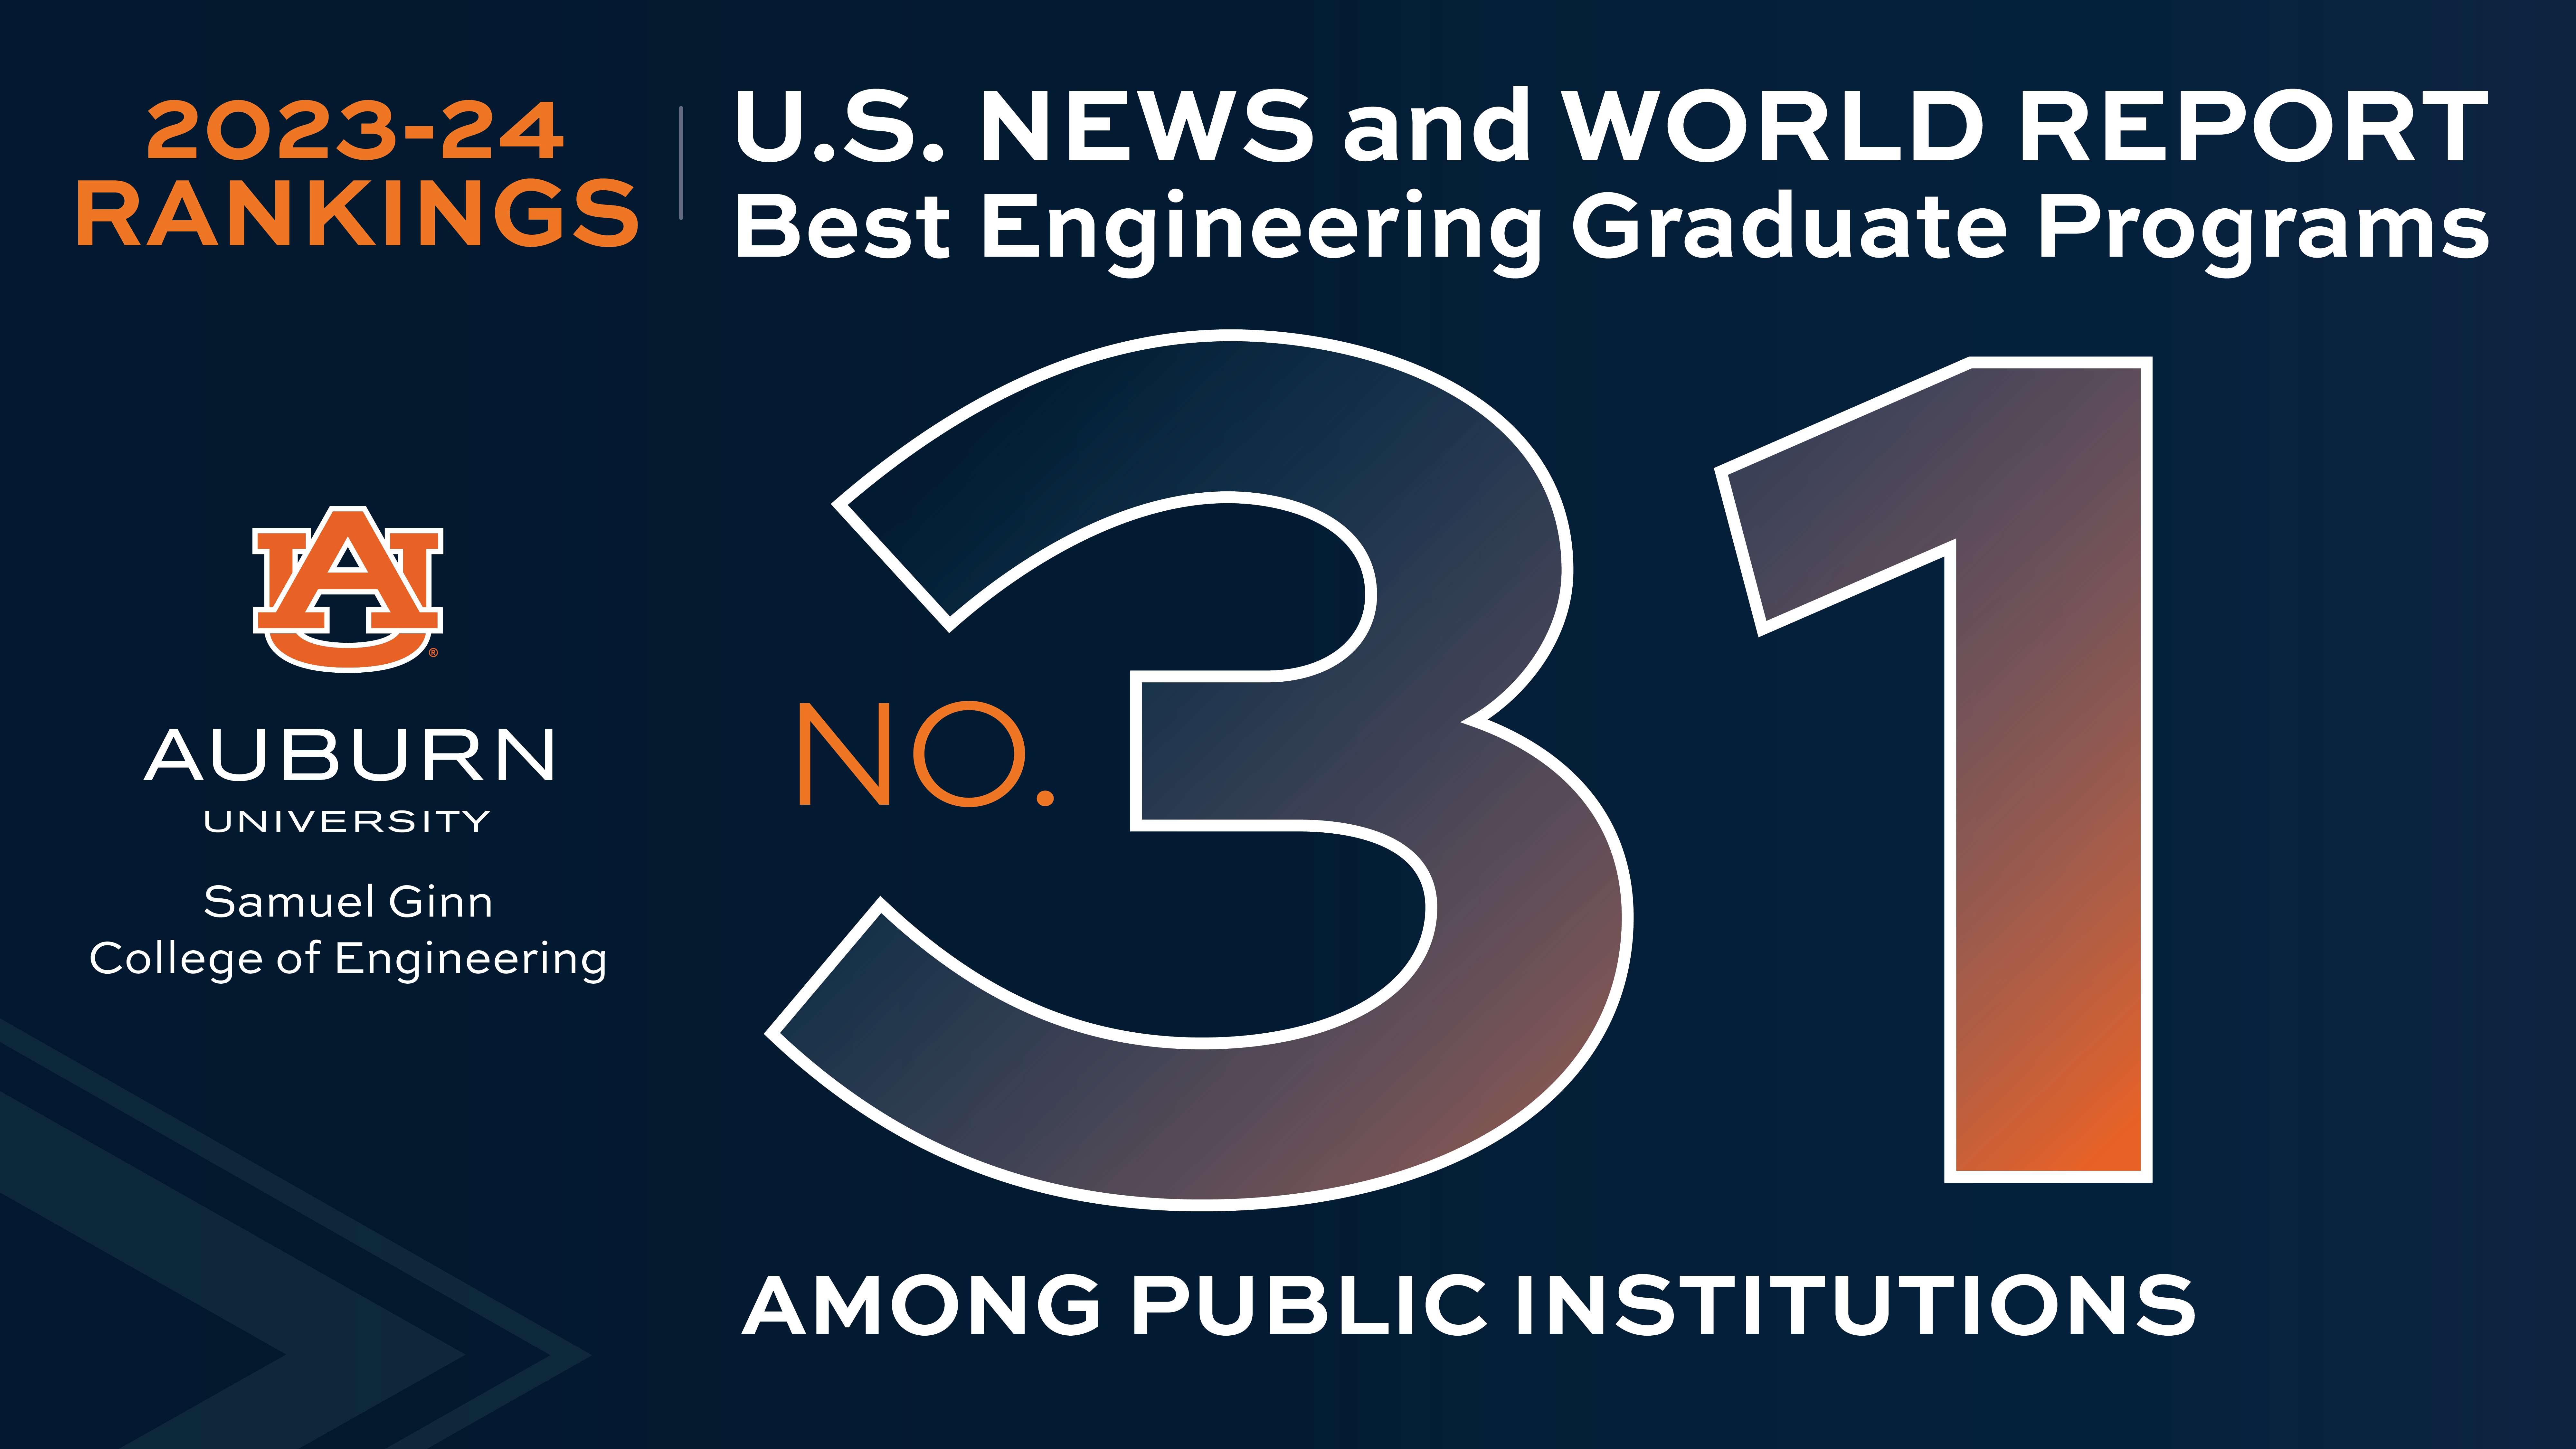 Auburn has climbed 10 spots in U.S. News' Best Engineering Graduate Program rankings over the past four years.